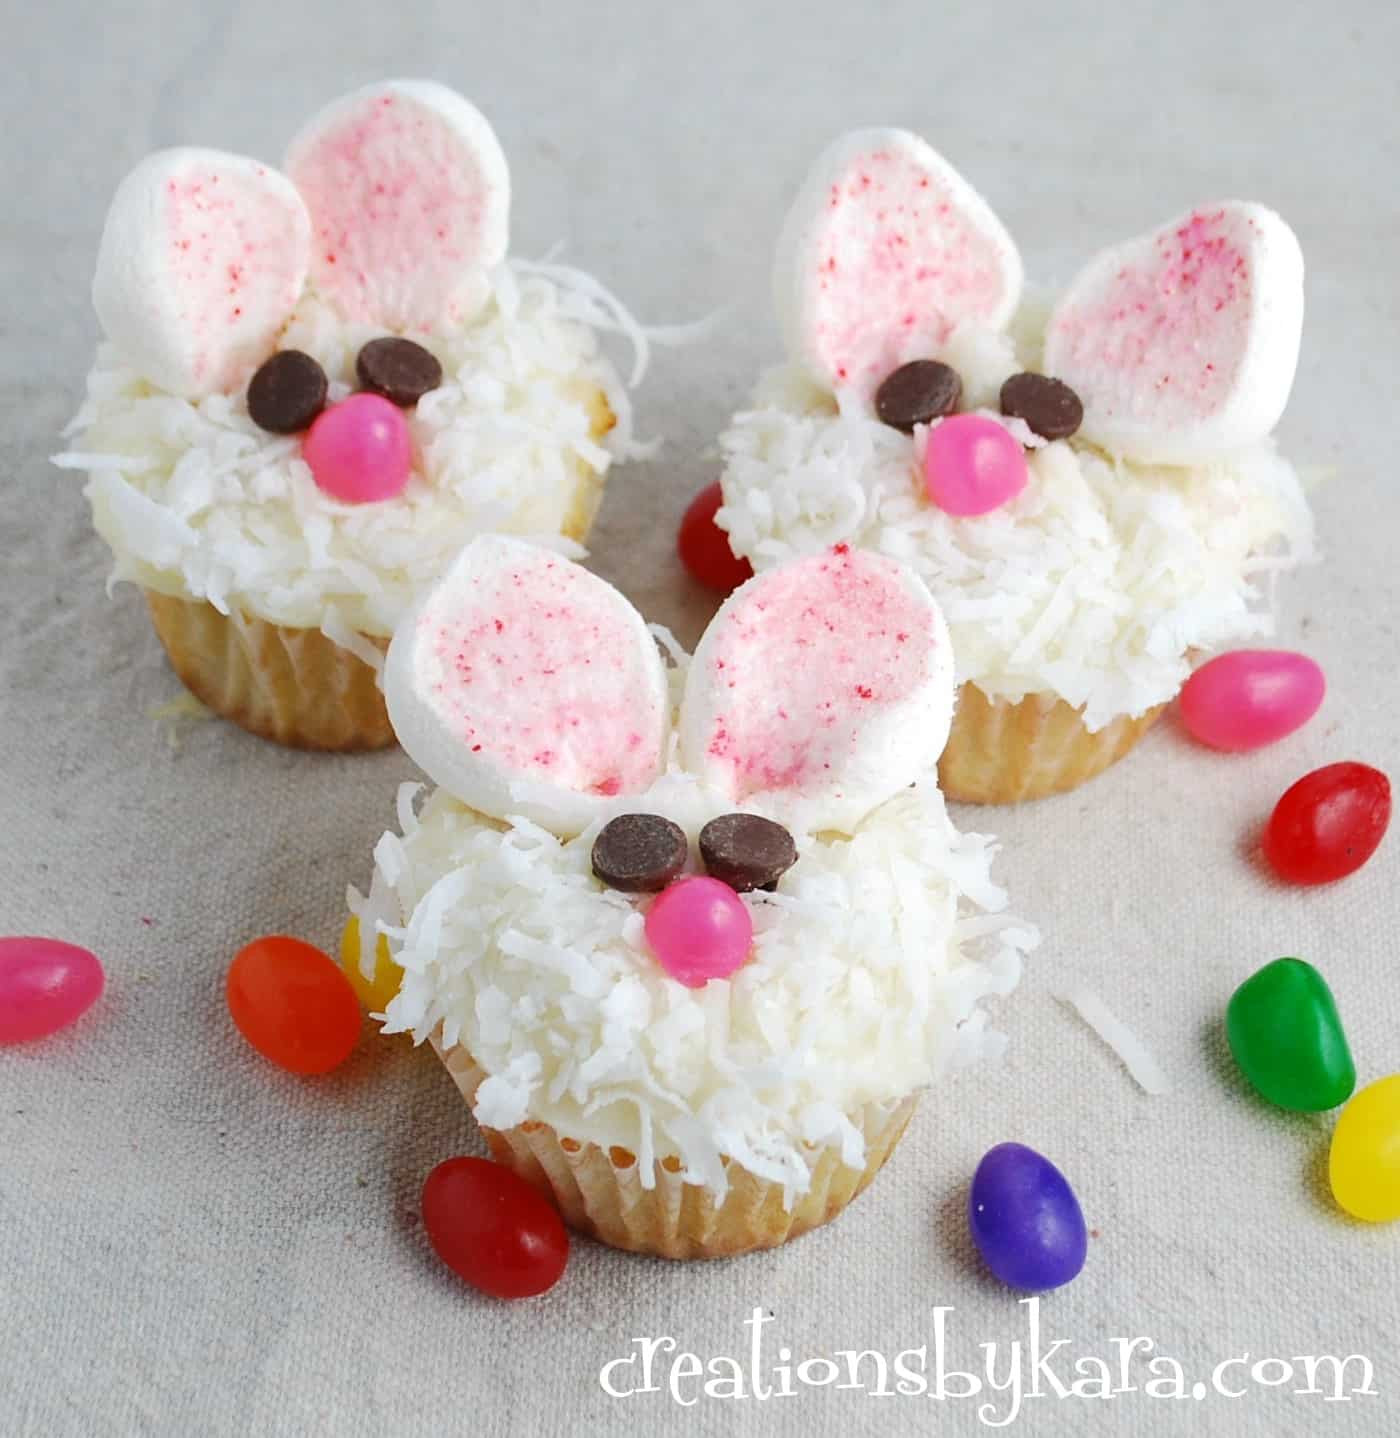 Cute Easter Cupcakes 20 Of the Best Ideas for Cute Easter Cupcakes